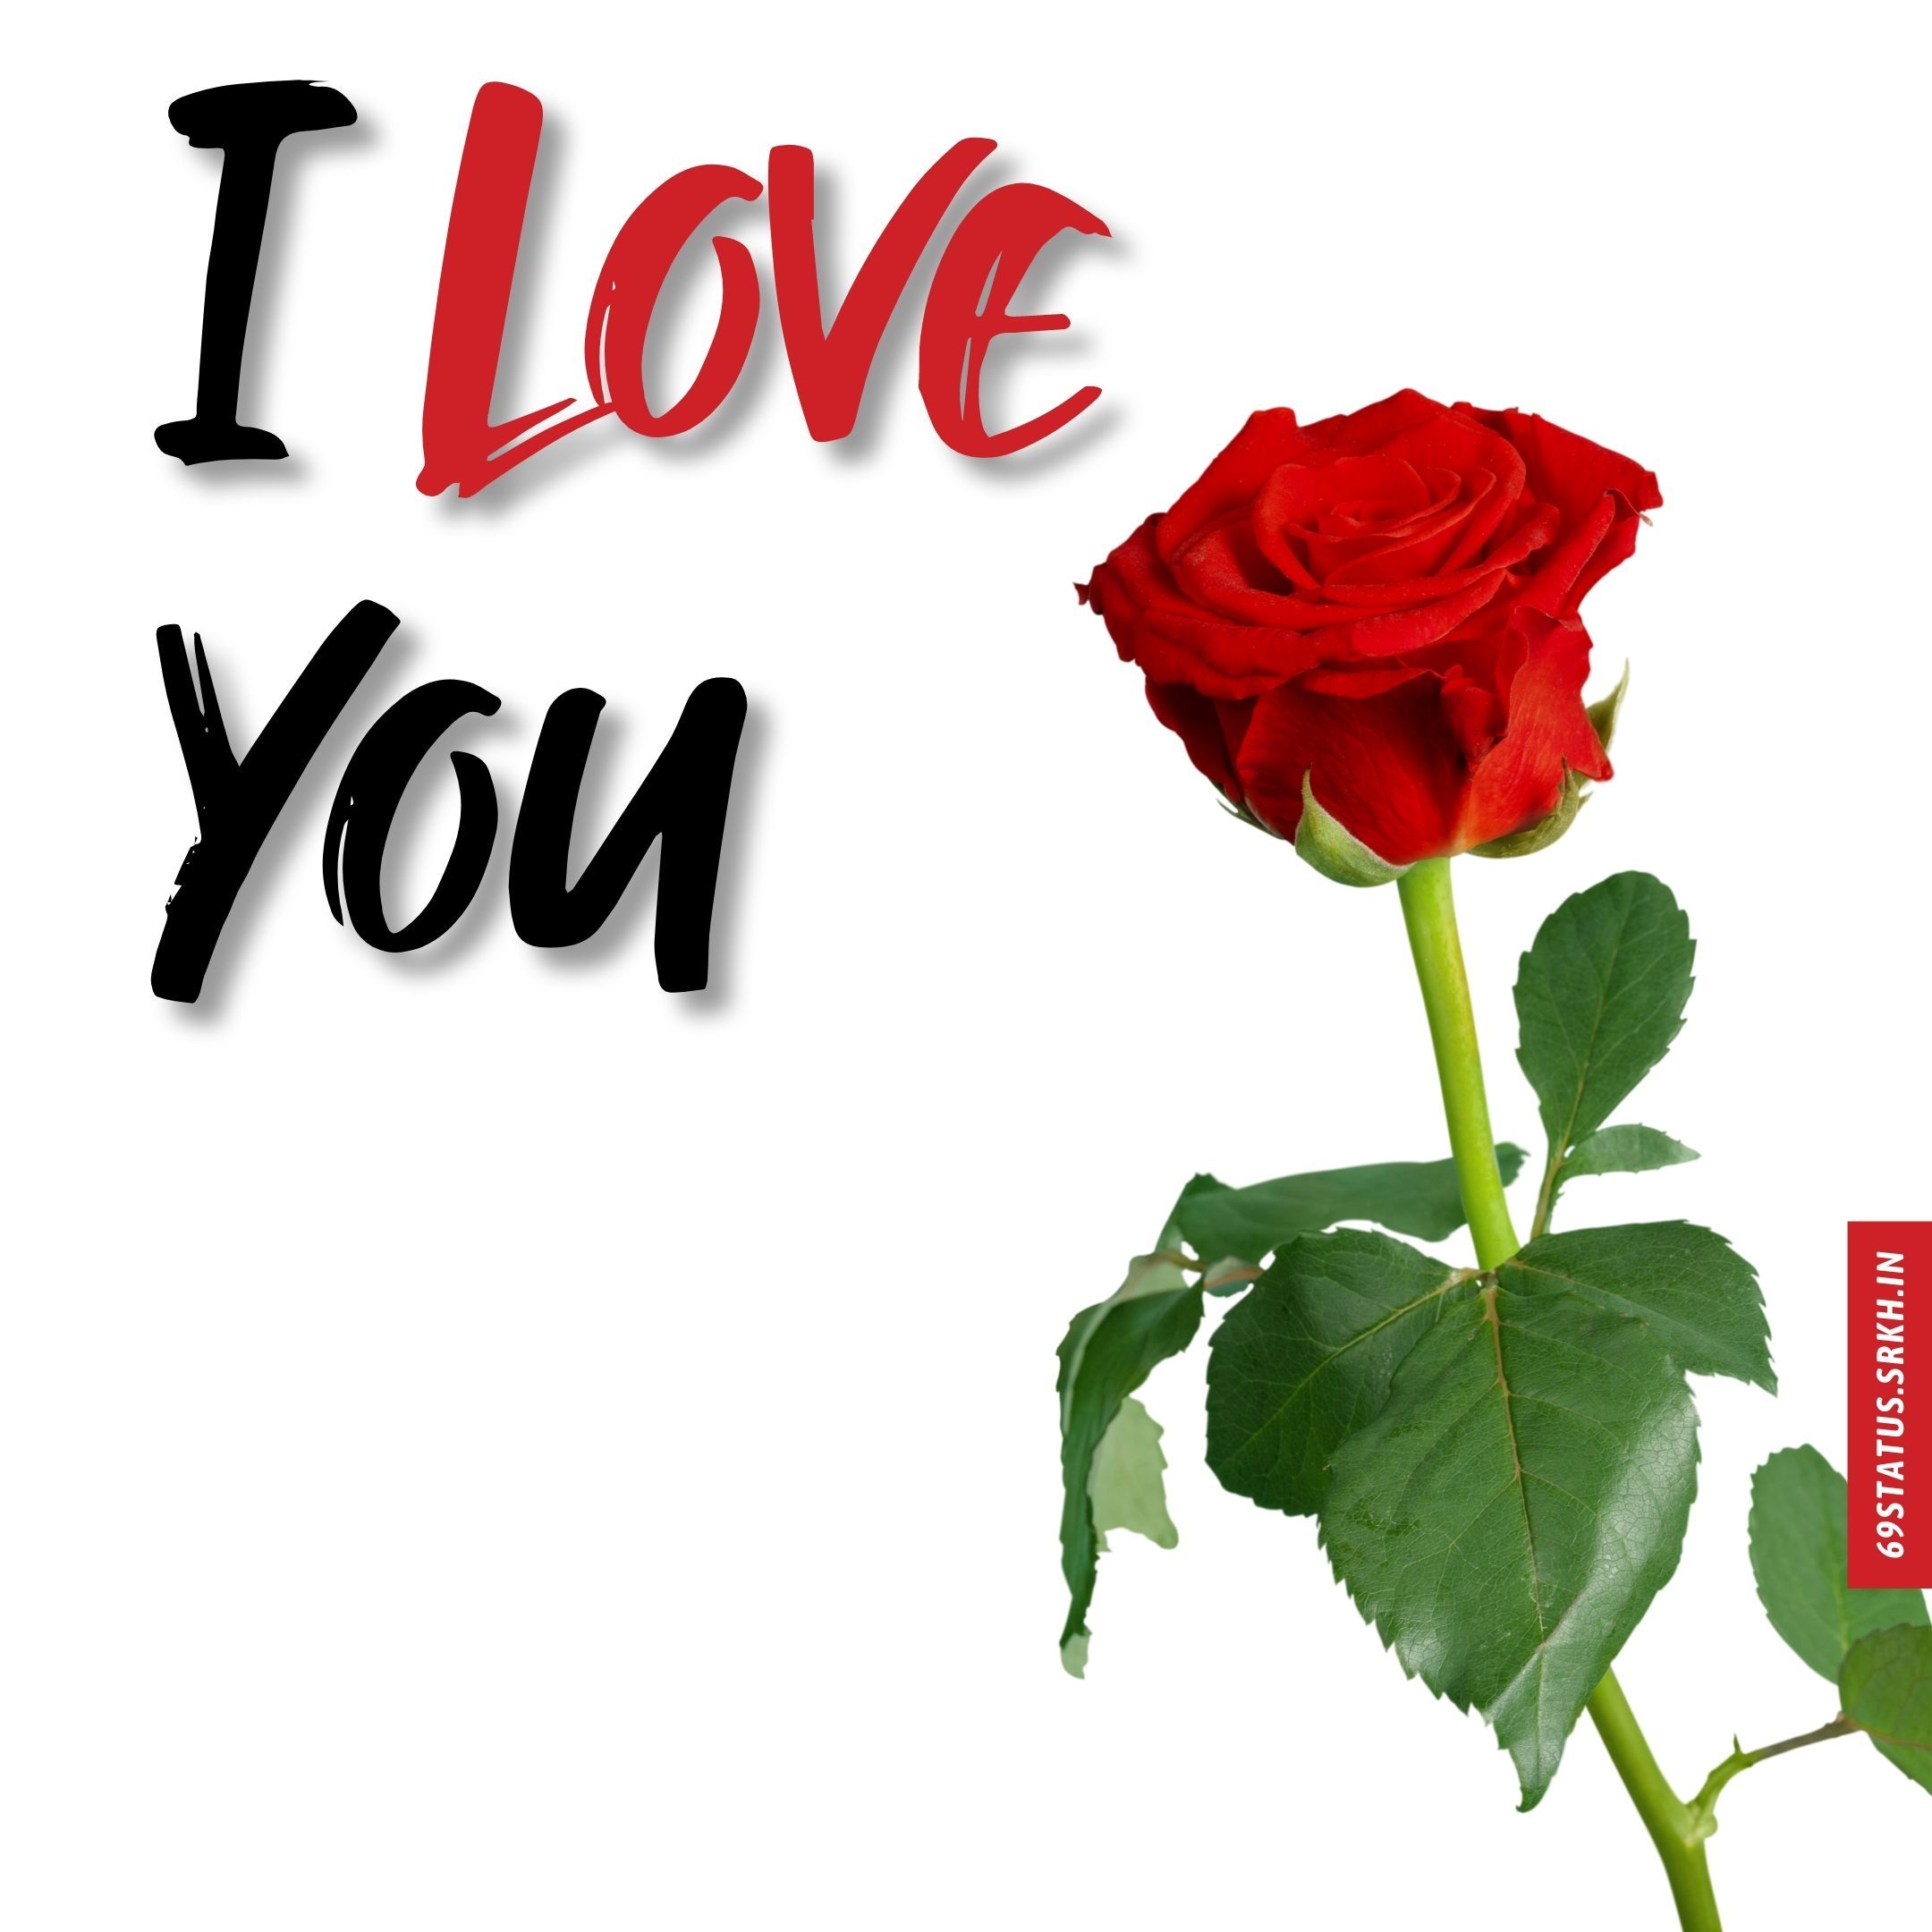 Rose image with I Love You. Love you image, I love you picture, Love rose flower